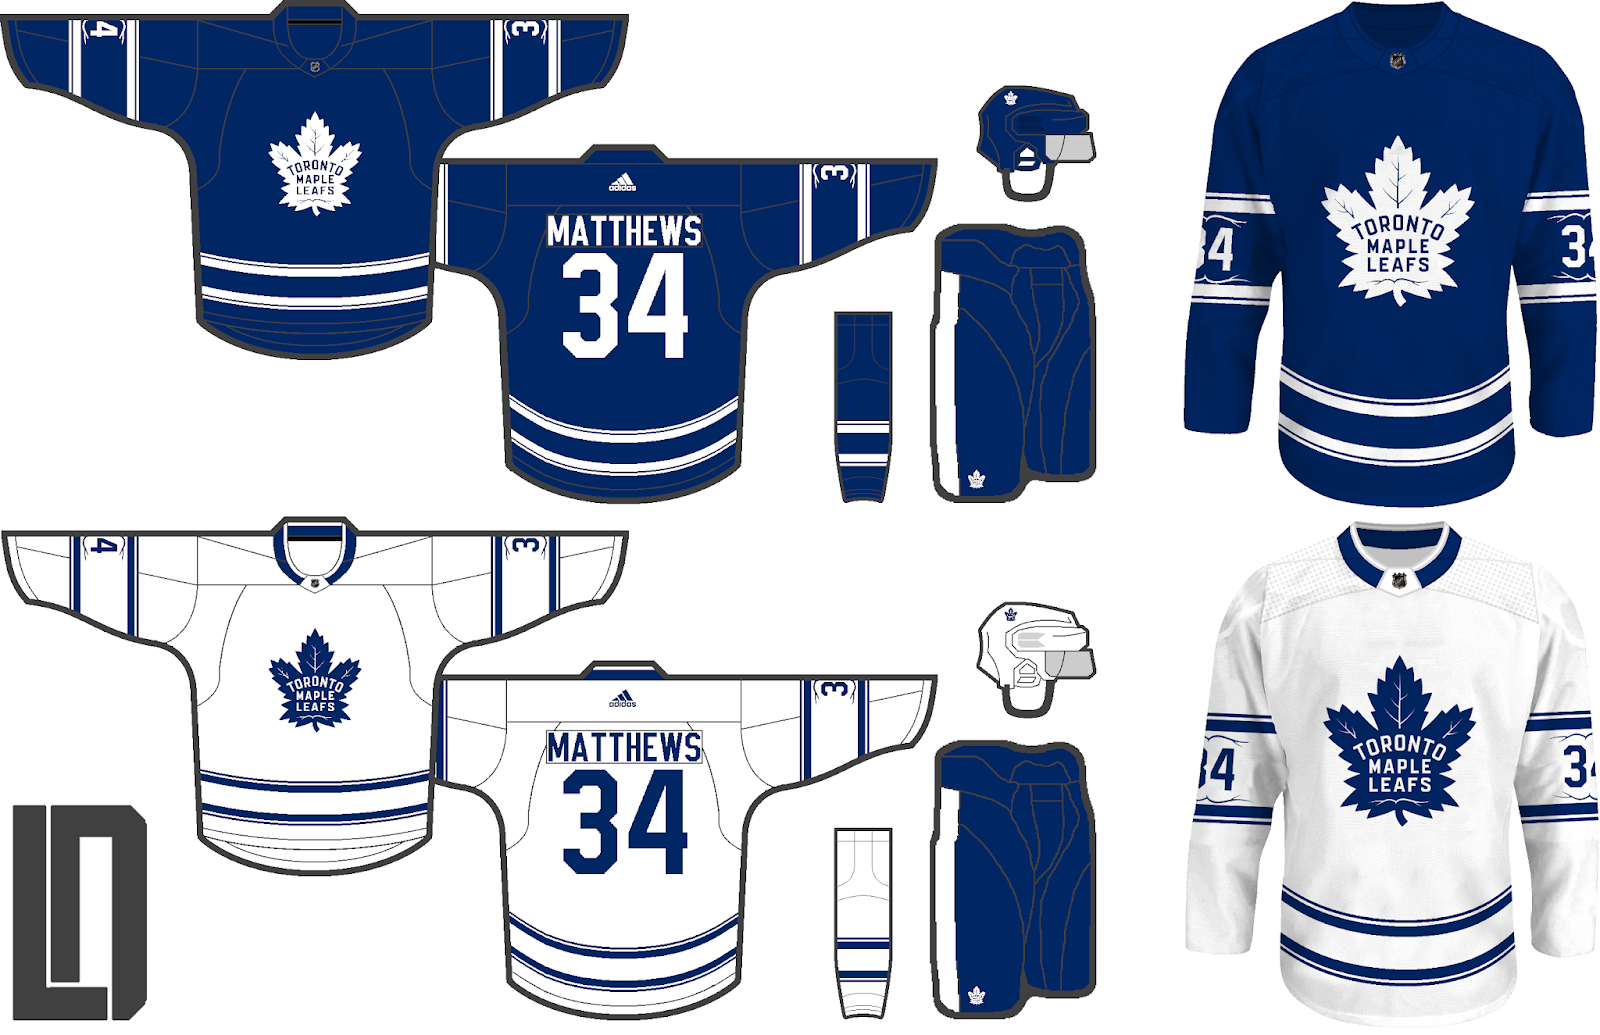 Toronto+Maple+Leafs+Concept2.png